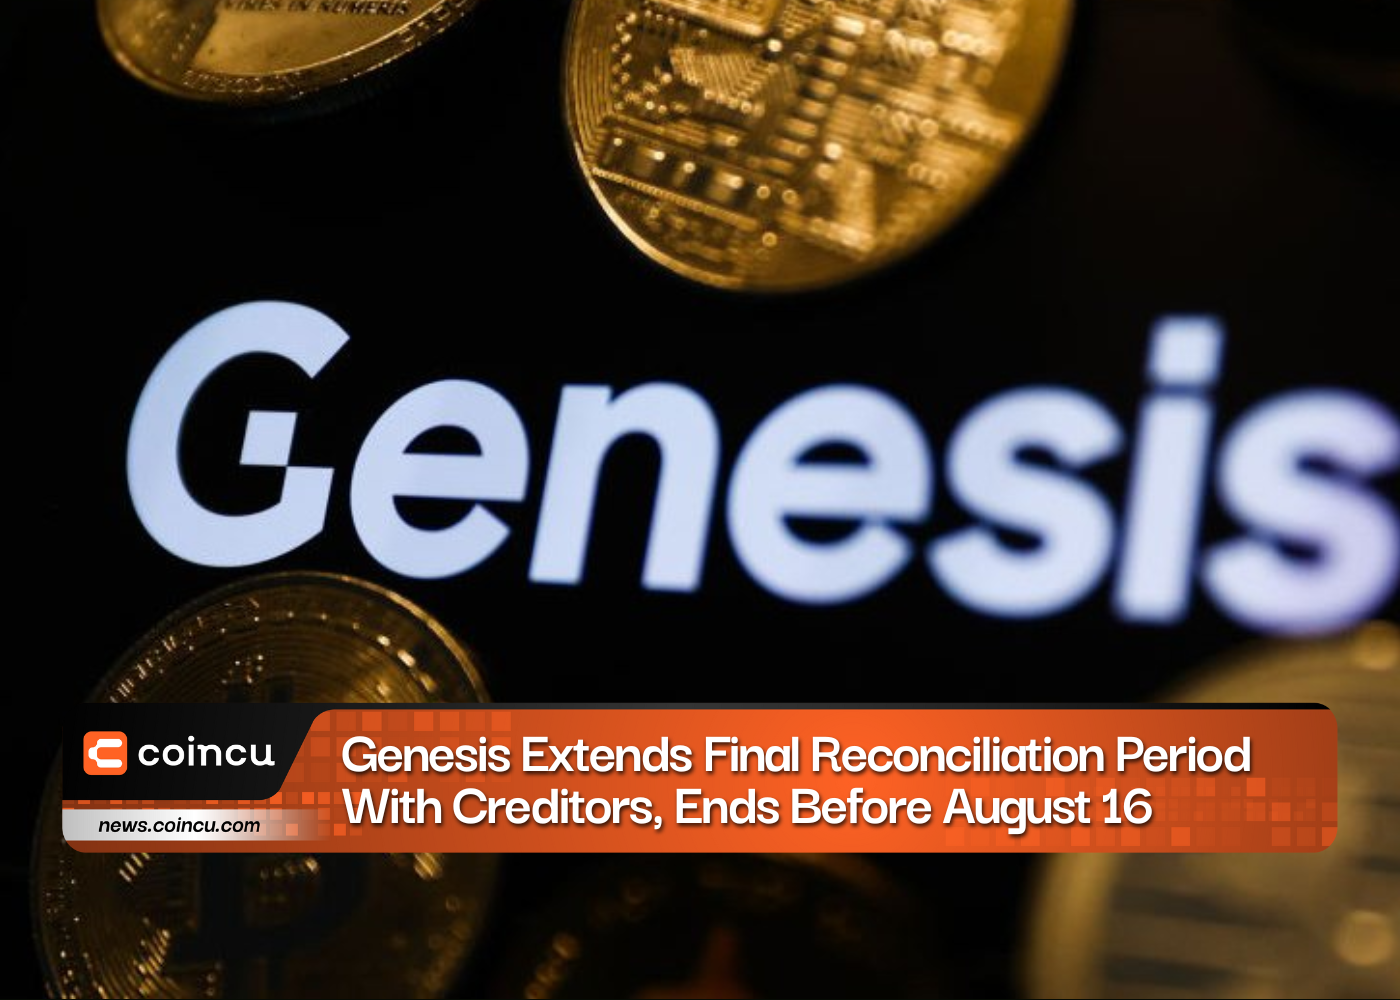 Genesis Extends Final Reconciliation Period With Creditors, Ends Before August 16